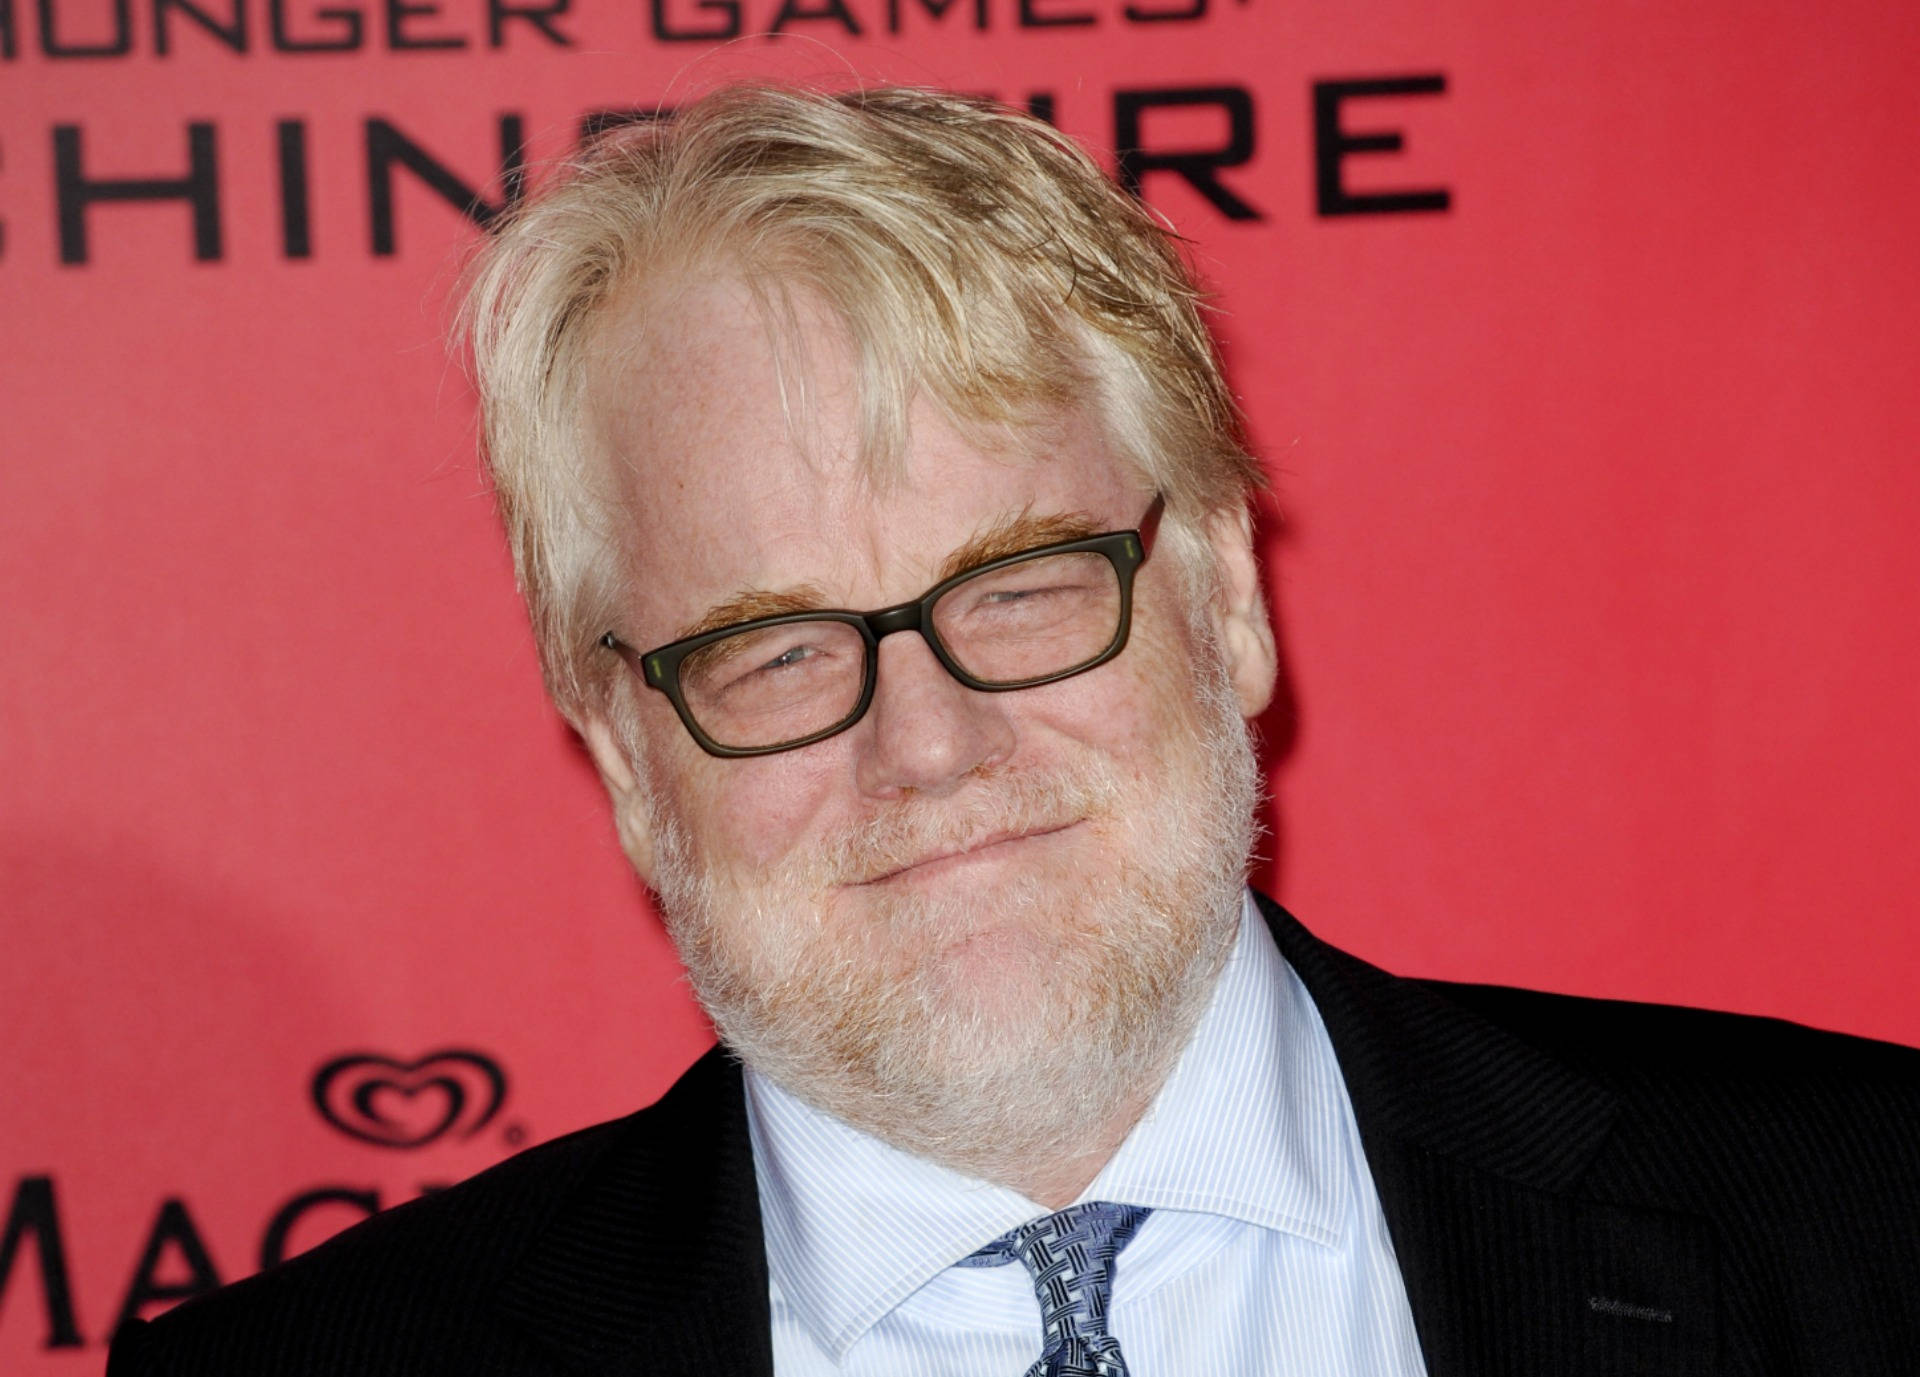 Philip Seymour Hoffman at The Hunger Games Premiere Wallpaper